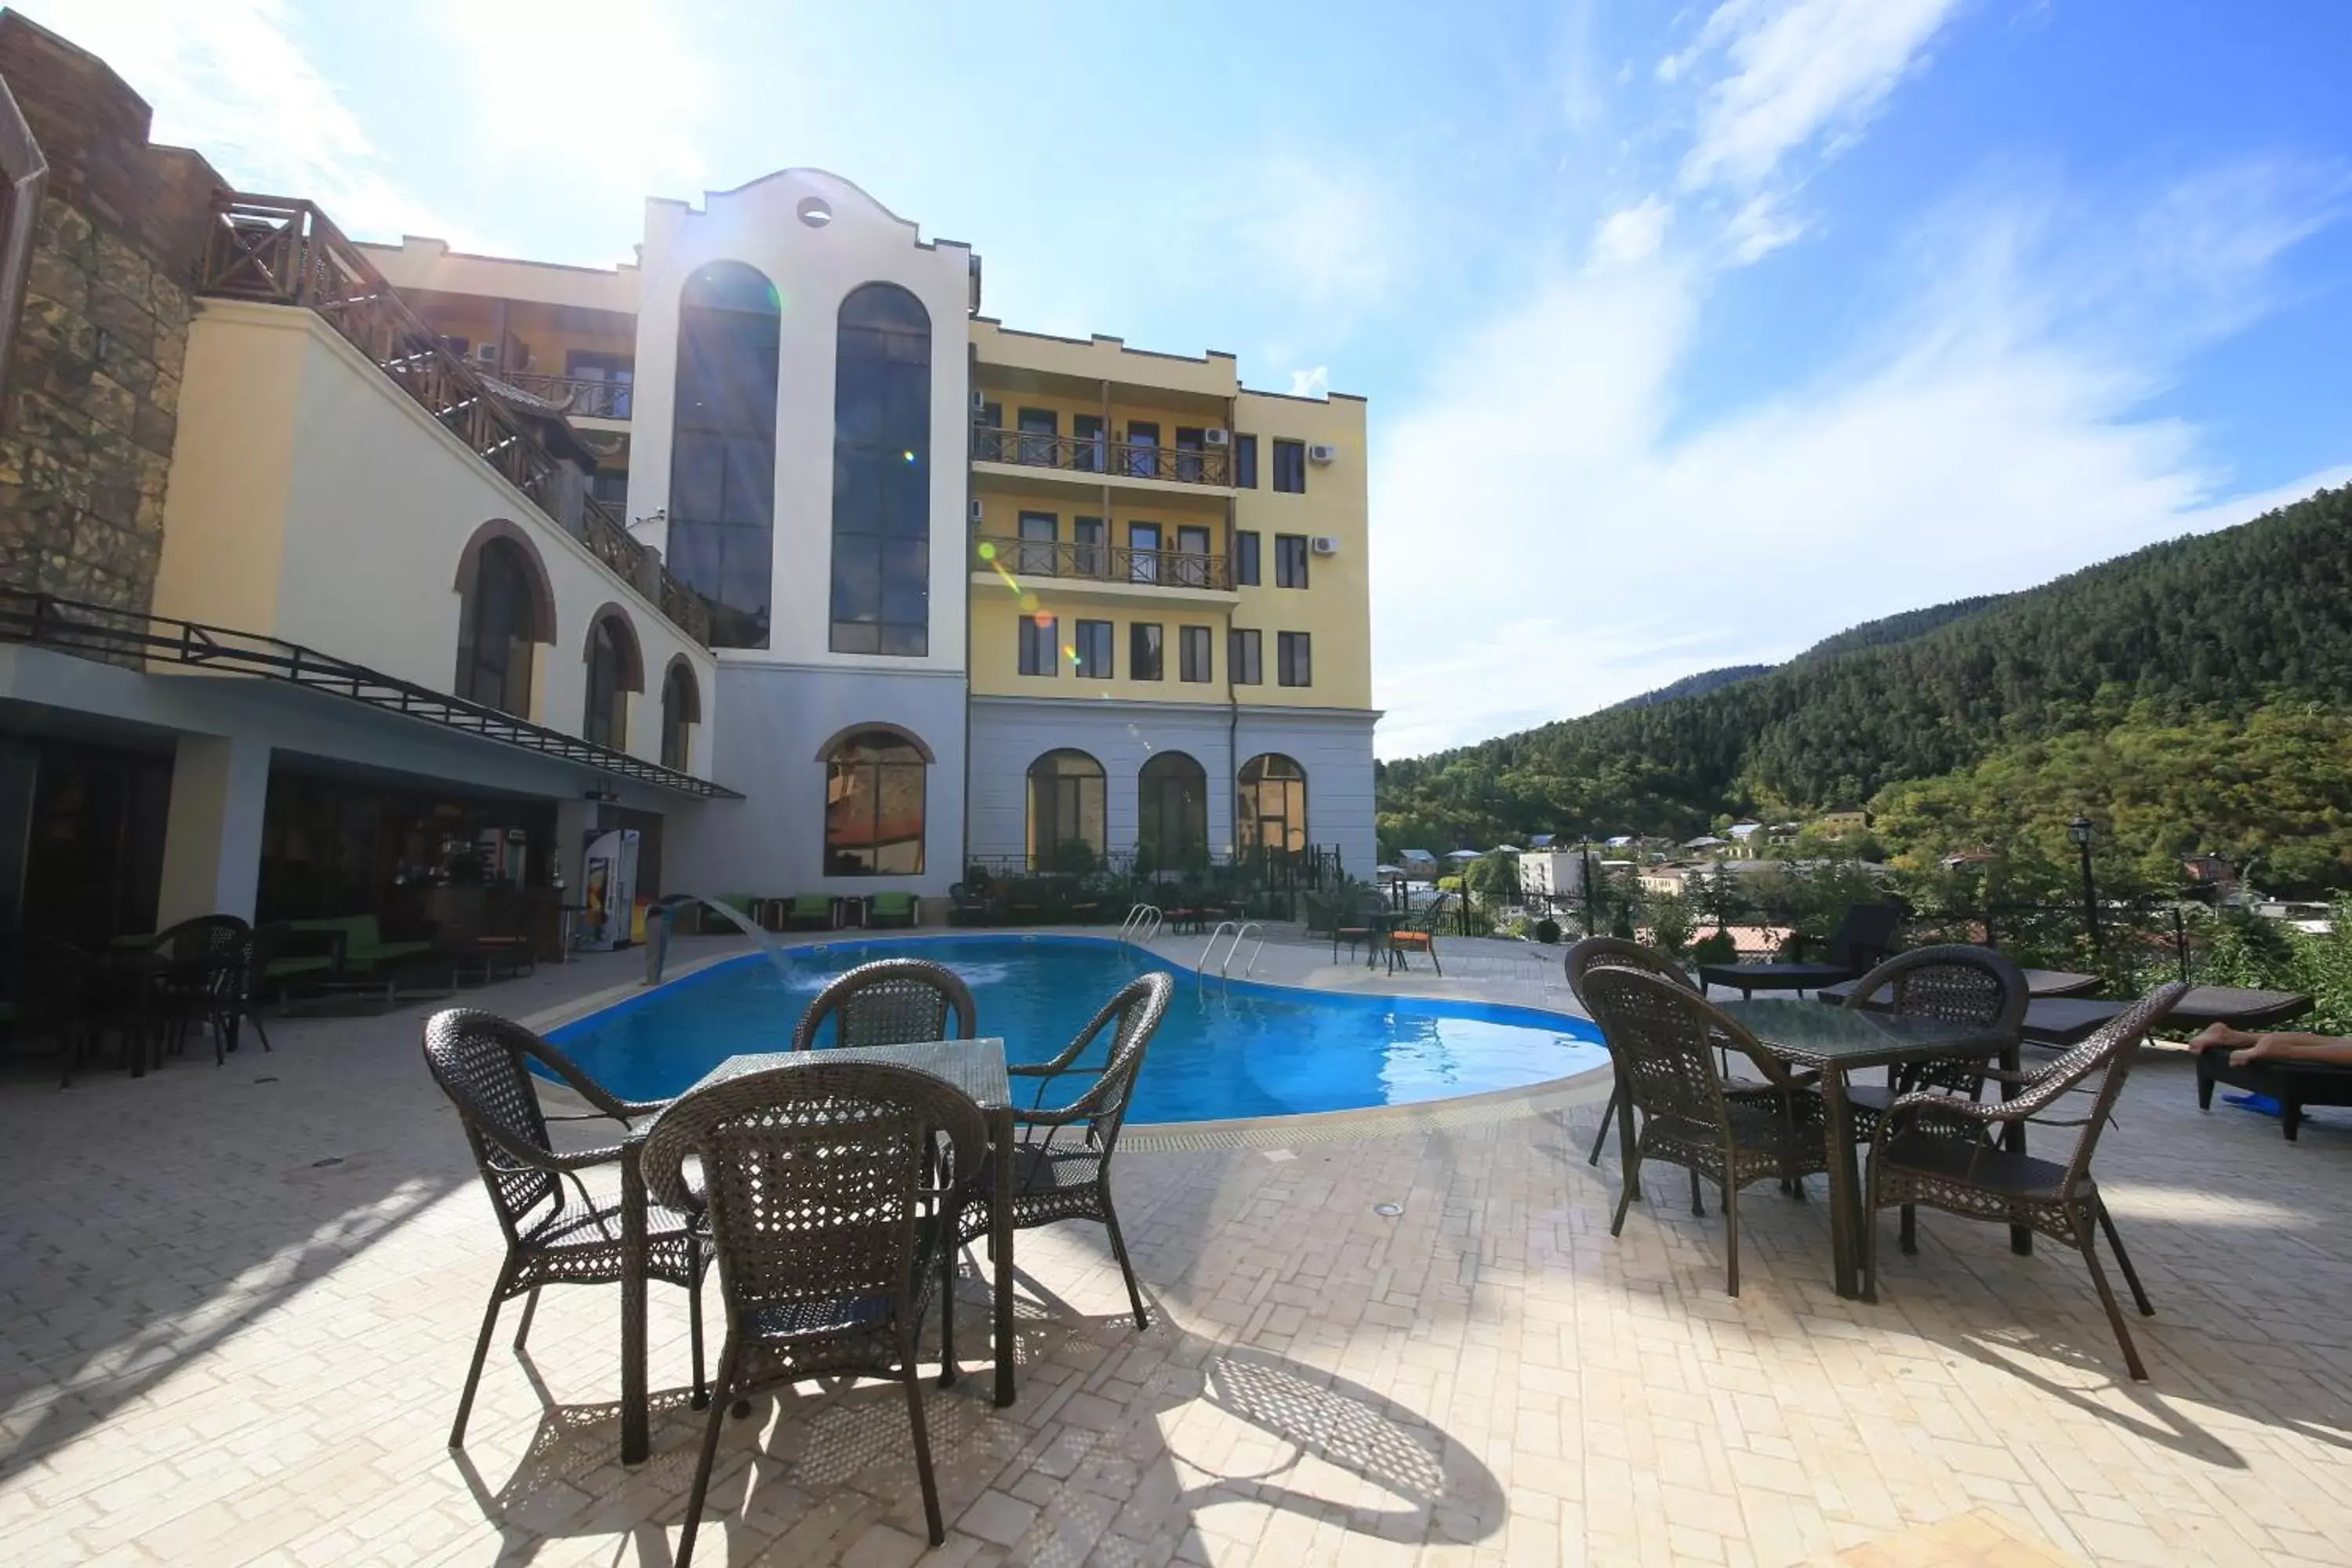 Property building, Swimming Pool in Borjomi Palace Health & Spa Center